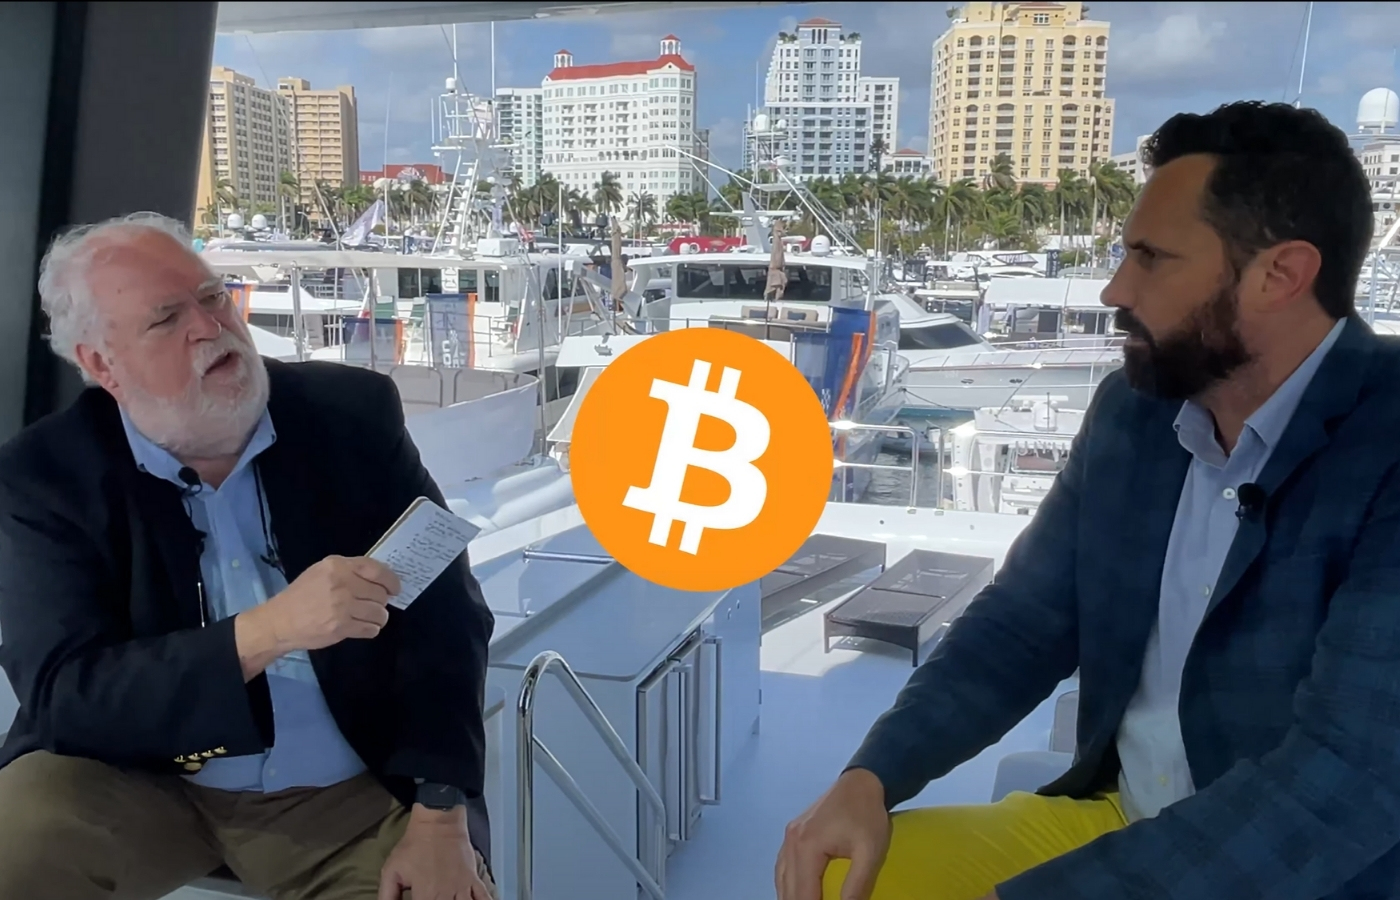 Bob Denison Explains Cryptocurrency with BoatTEST [In the News]